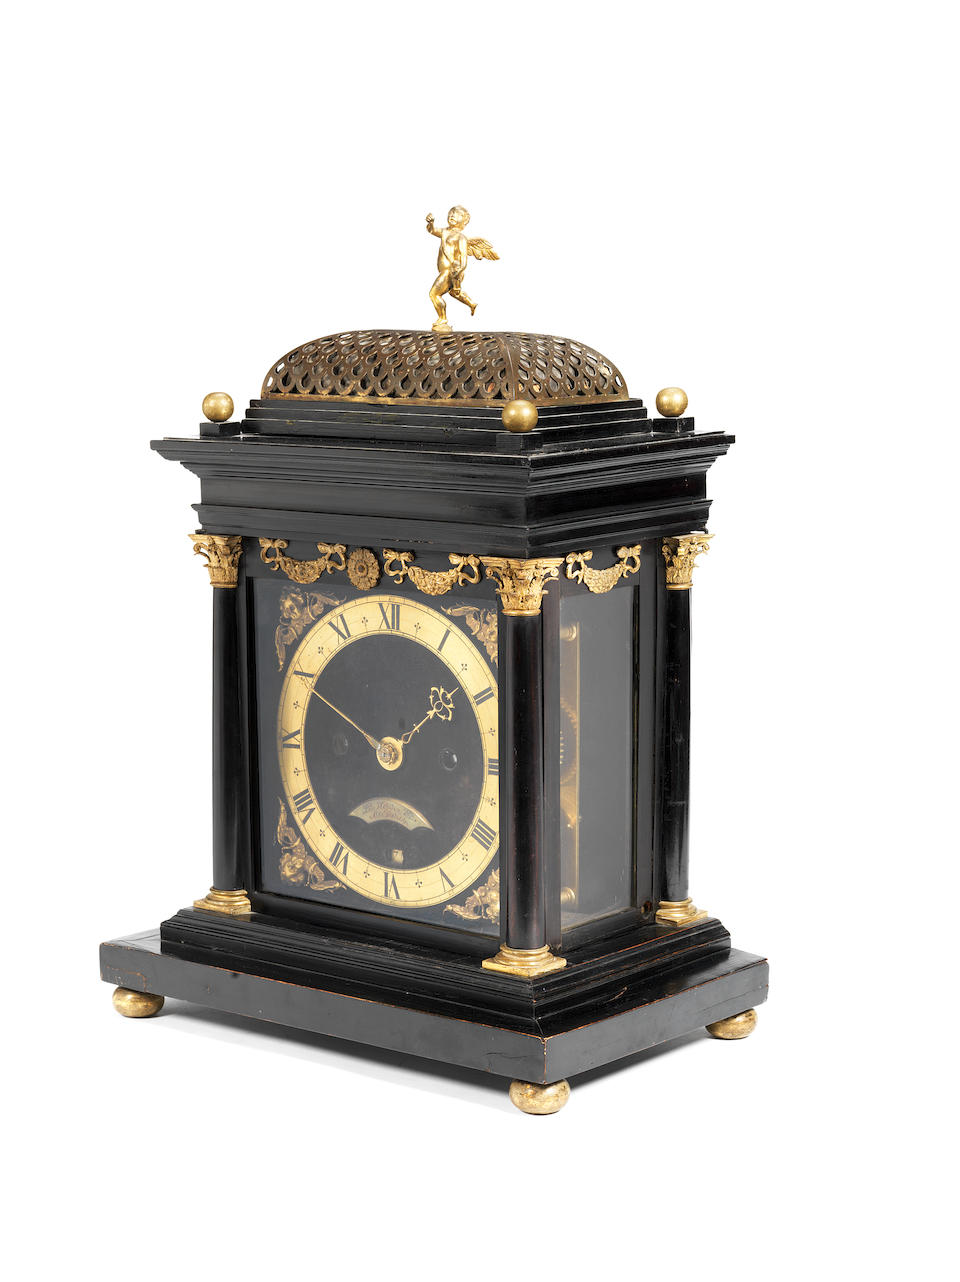 A highly important, recently discovered, English ebony bracket clock attributable to Ahasuerus Fromanteel